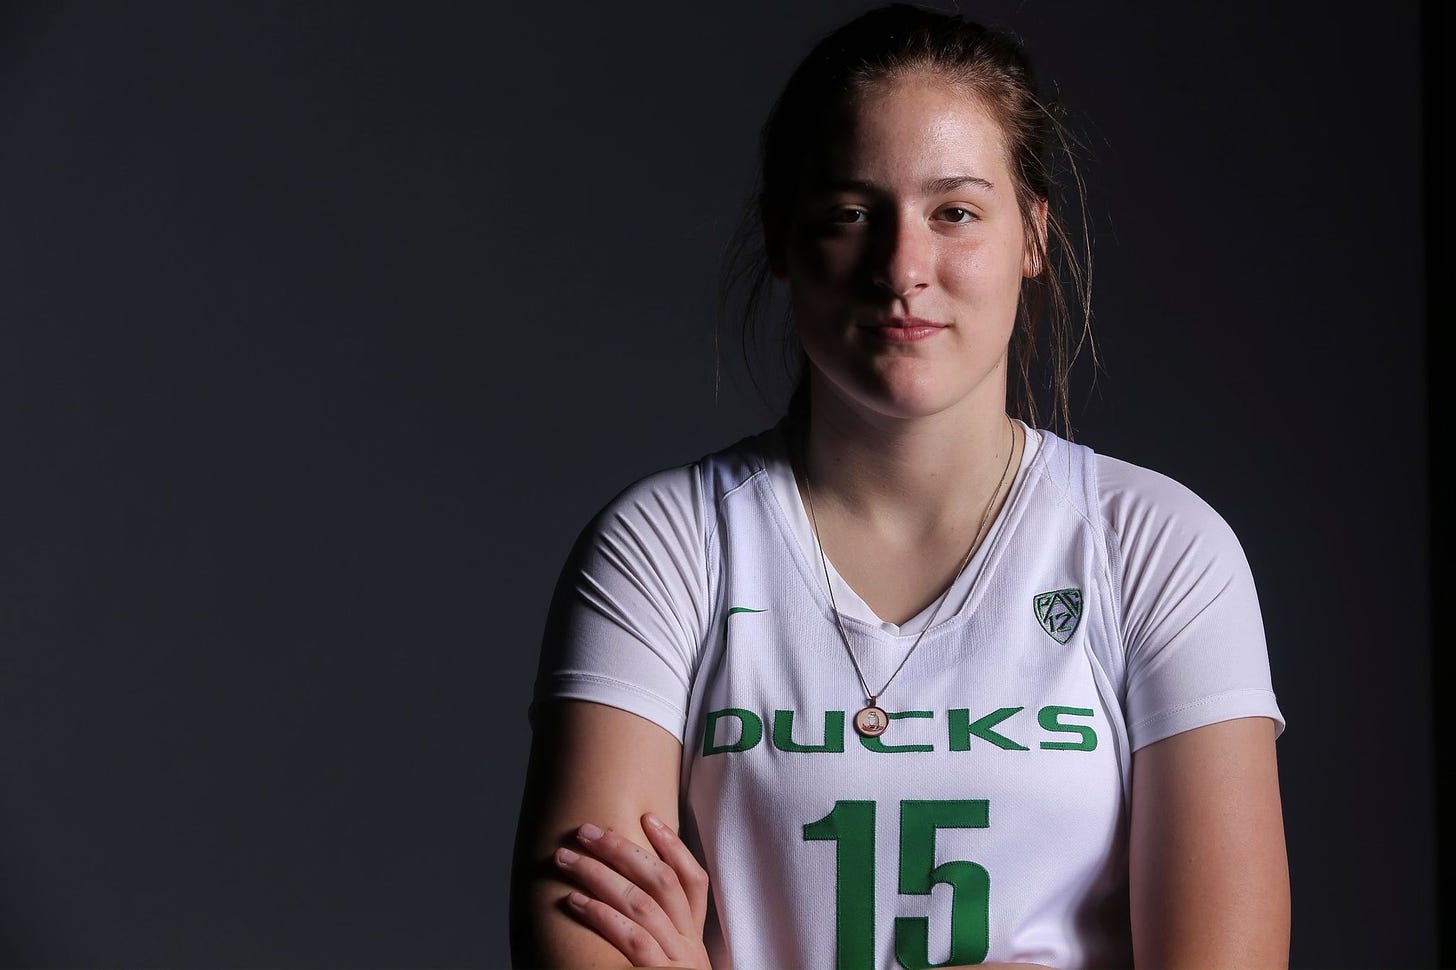 Oregon women's basketball's Sedona Prince among 2 Pac-12 athletes suing  NCAA, Power 5 conferences for share of TV, social media earnings -  oregonlive.com